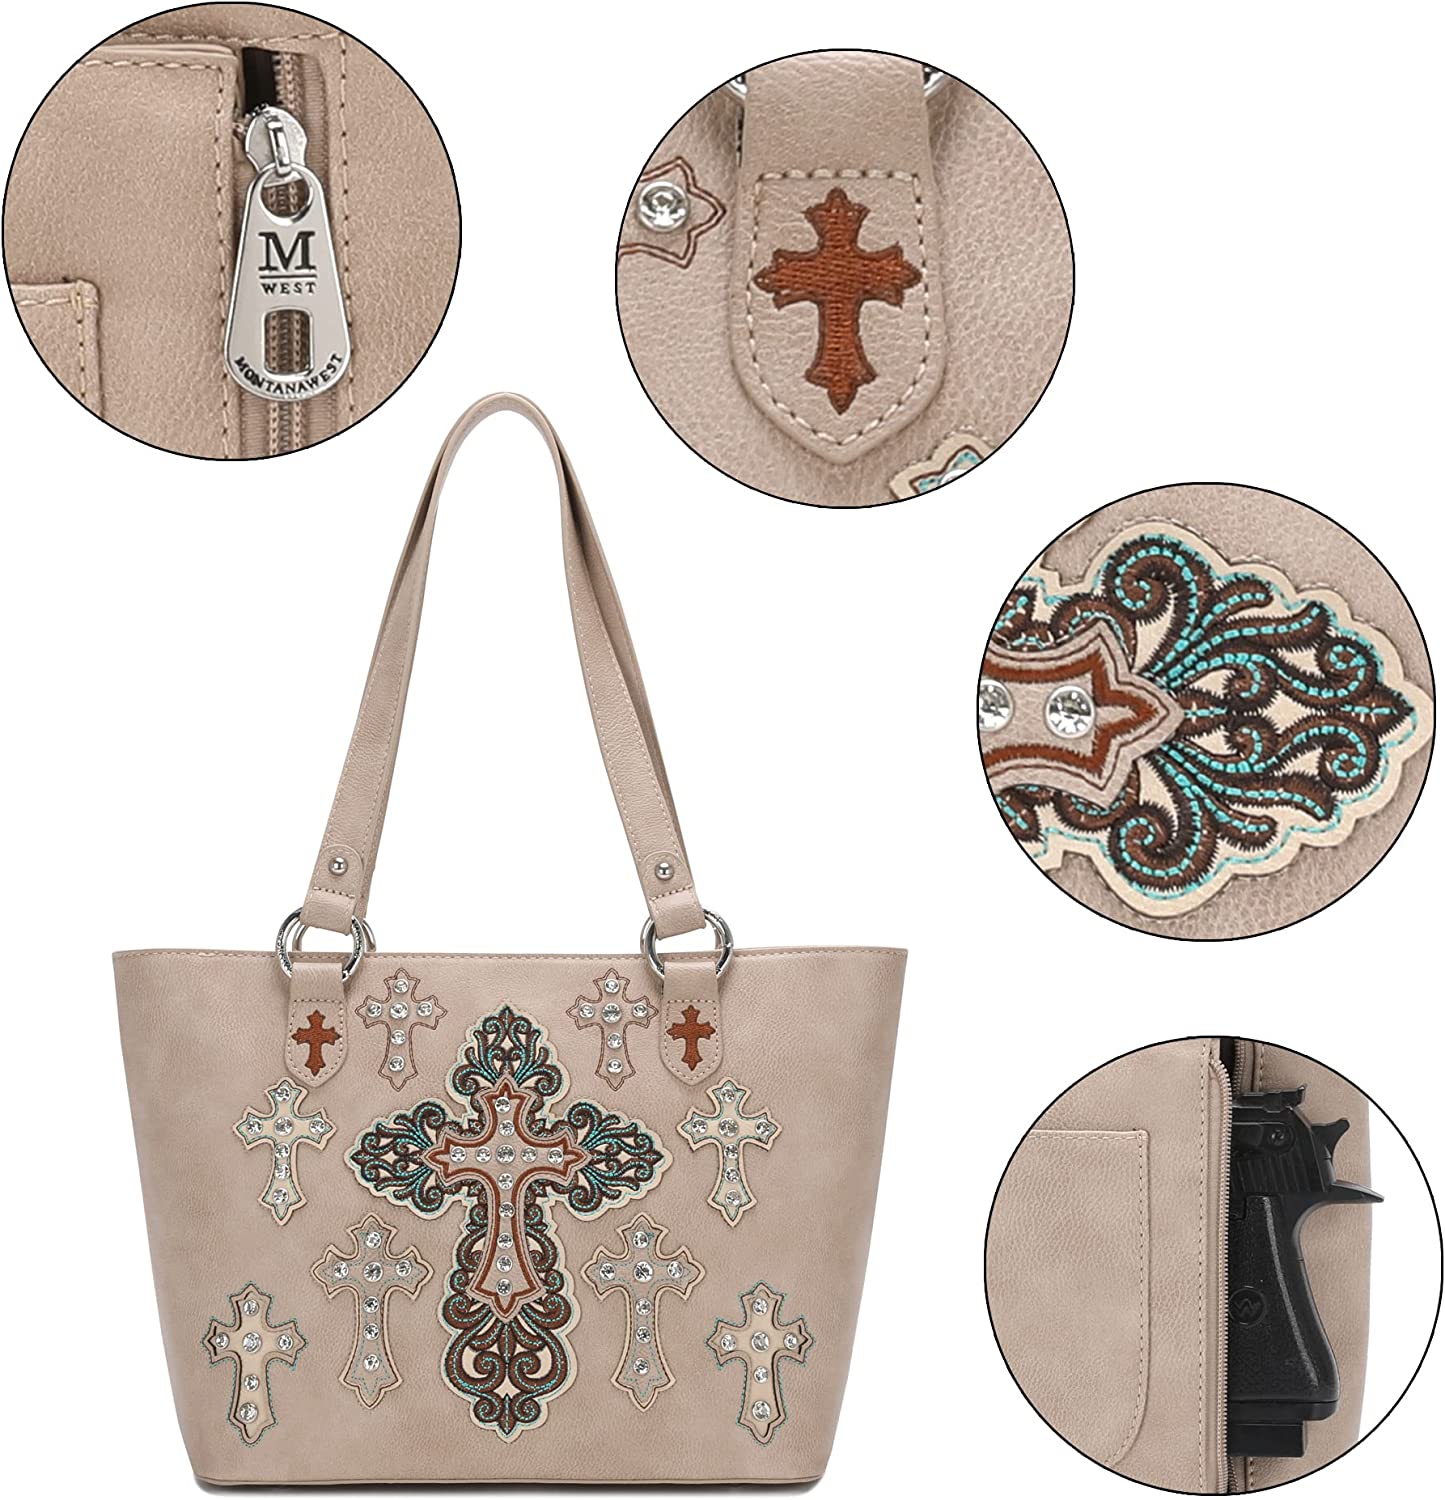 Montana West Reainstone Embroidered Cross Collection Concealed Carry Tote